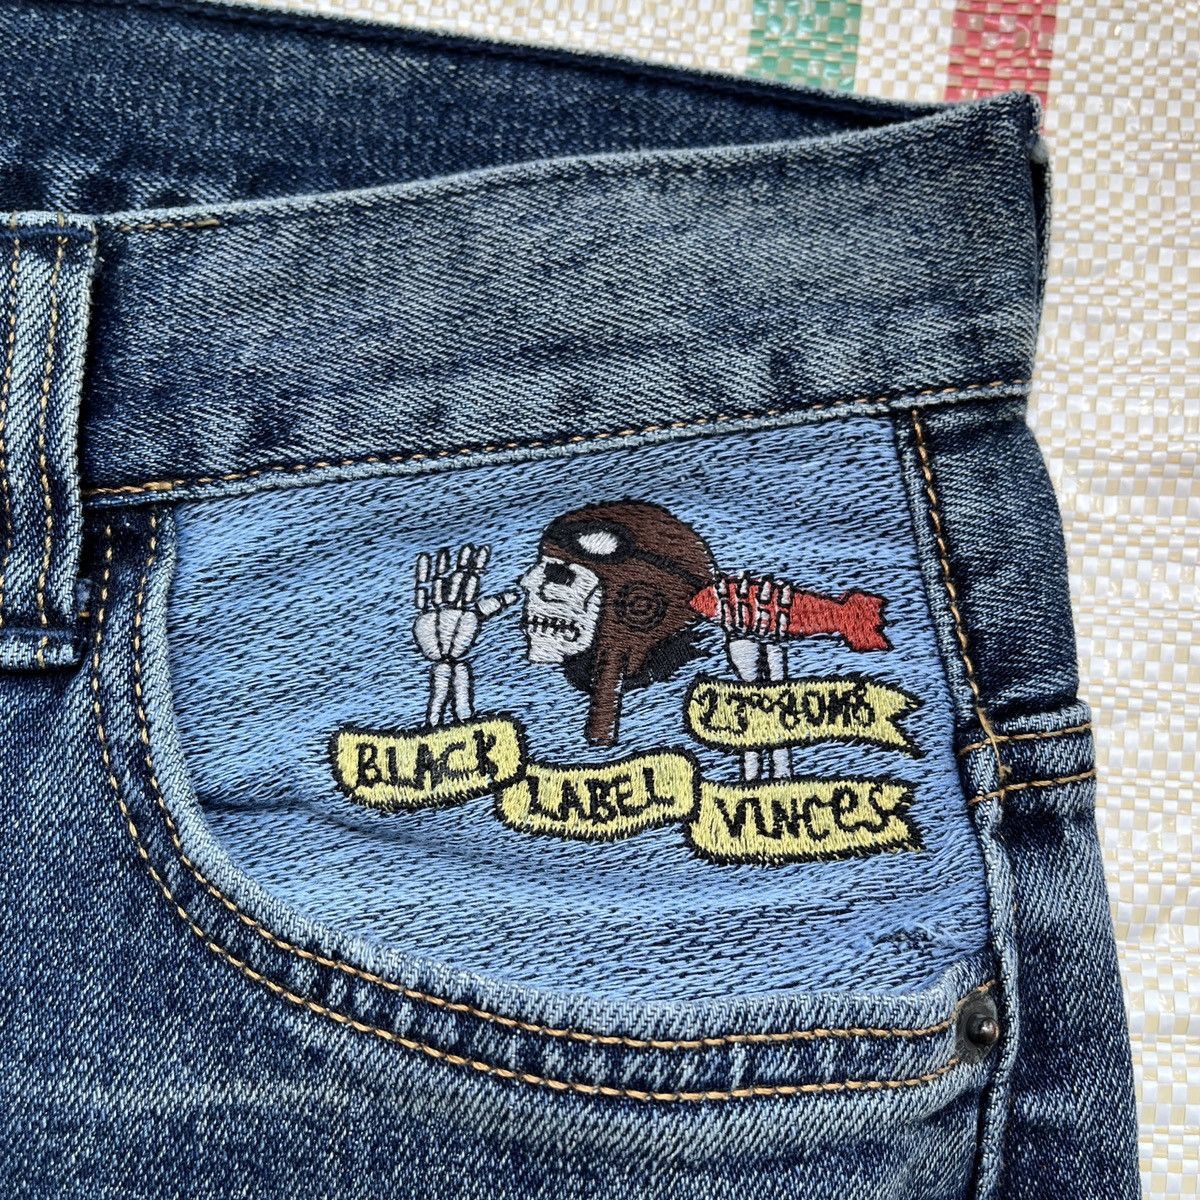 Distressed Denim - Ripped Black Label Denim Jeans With Patches At Pocket - 6